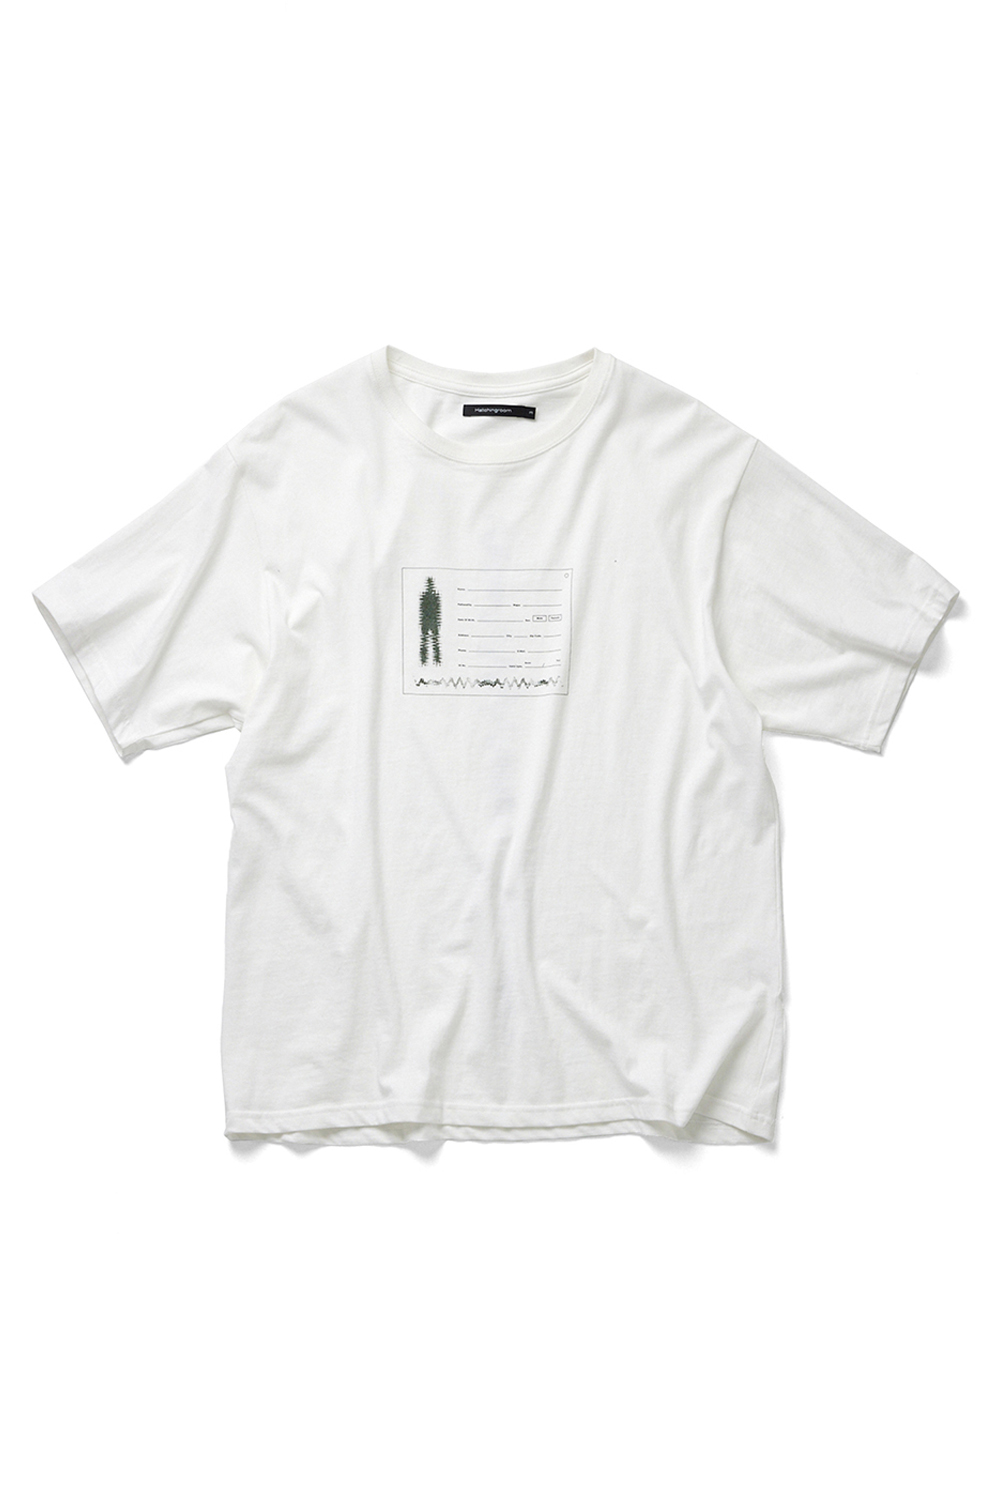 Ghost I.D Tee White